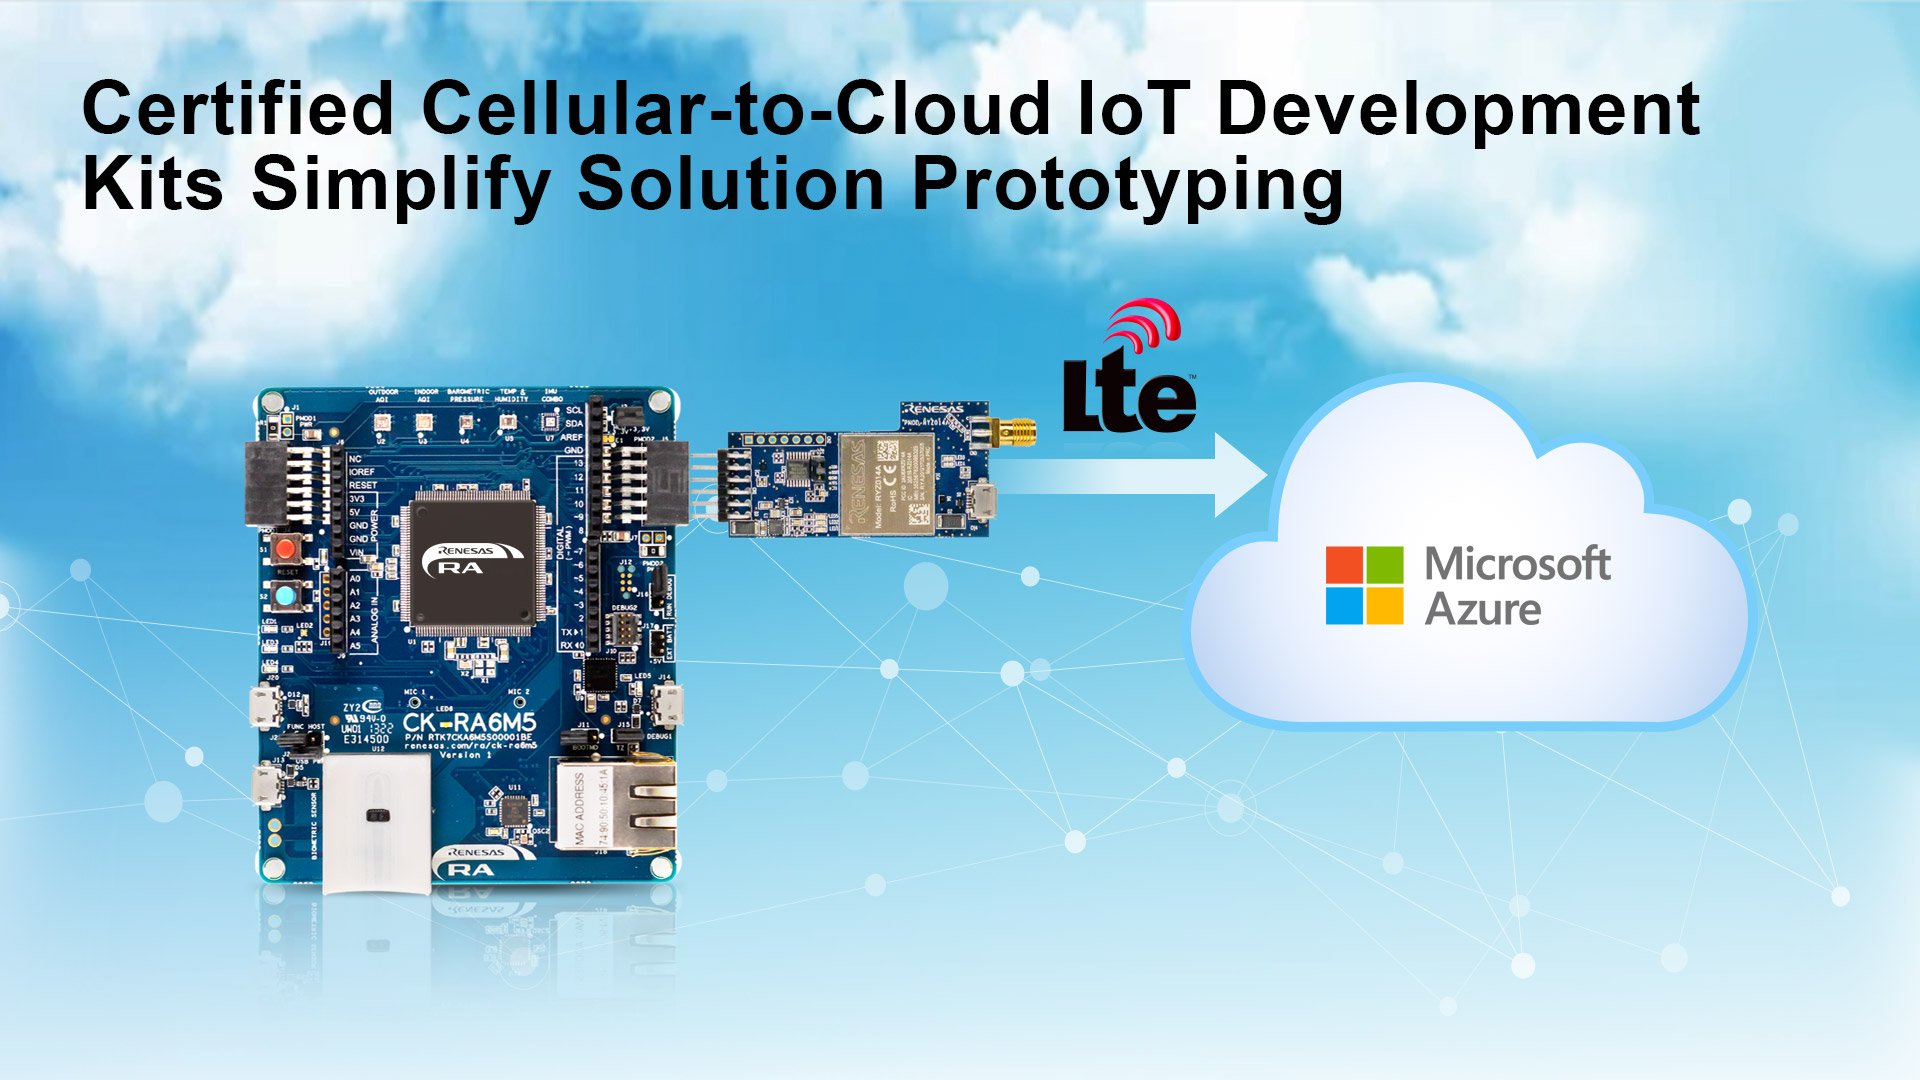 Renesas Cellular-to-Cloud Development Kits Now Connect to Microsoft Azure Services | Renesas